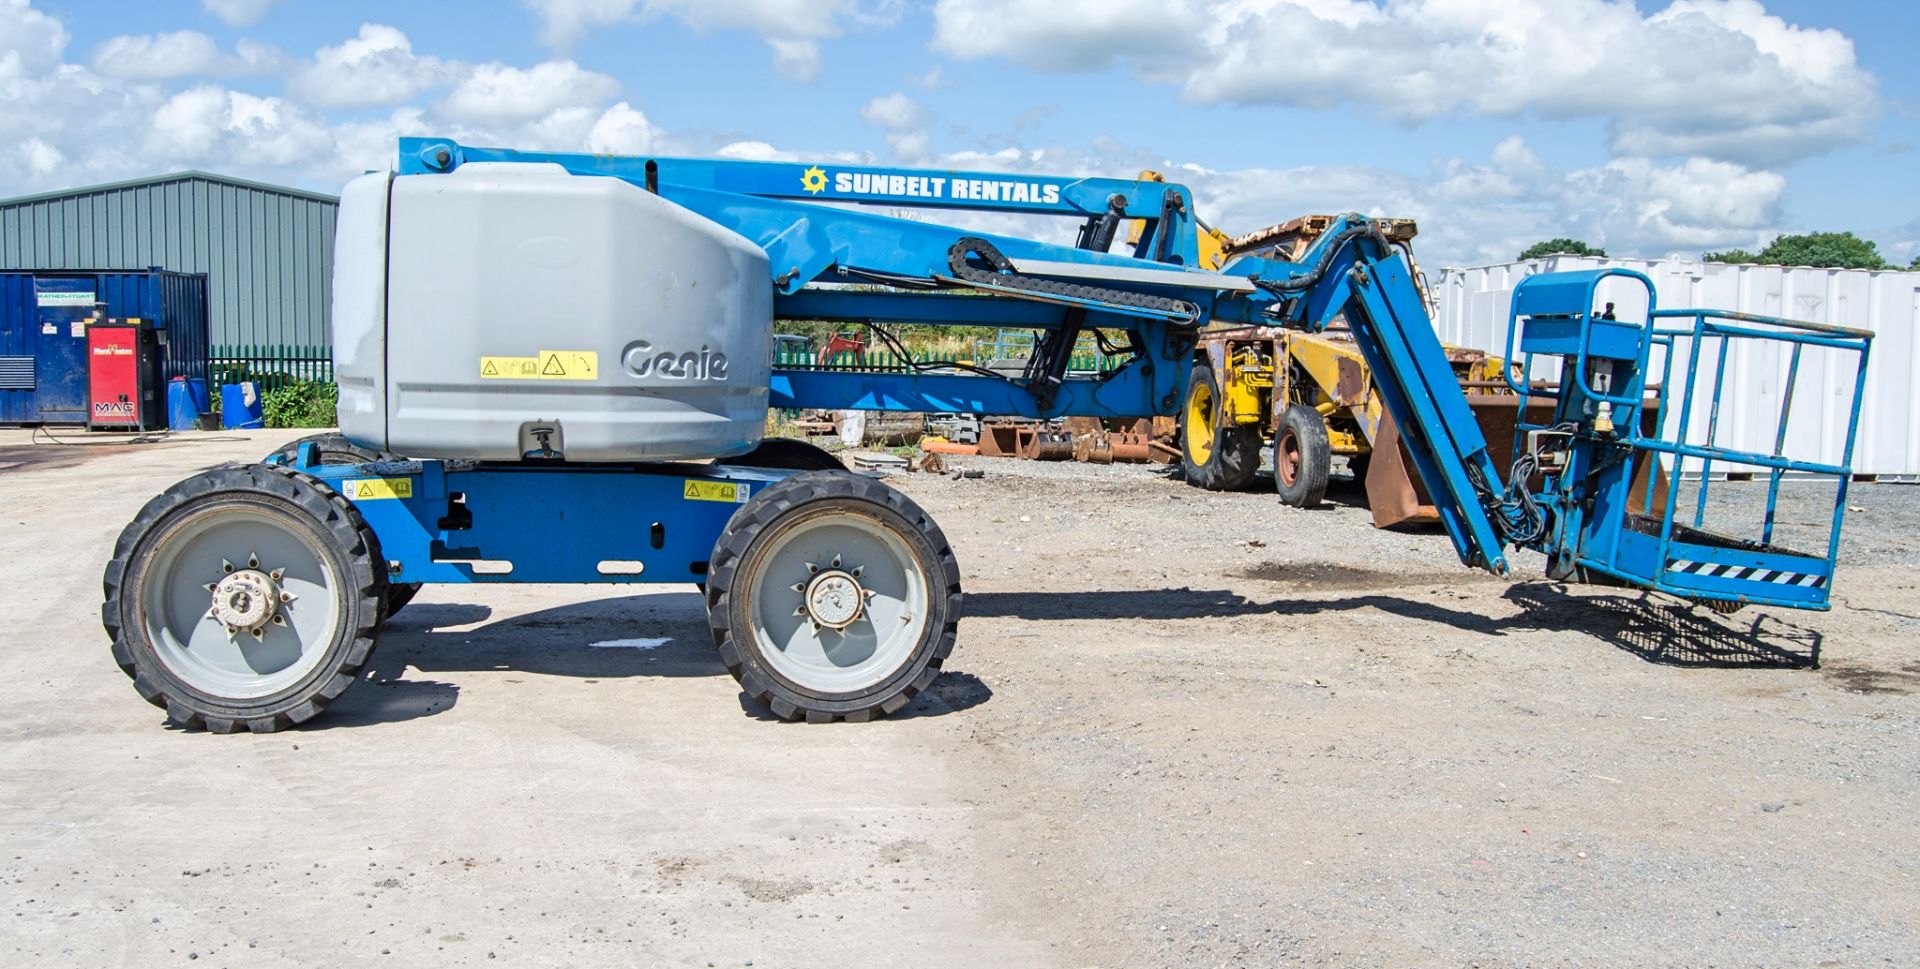 Genie Z-45/25 battery electric/diesel 4WD articulated boom lift Year: 2011 S/N: Z452512B-2013 - Image 8 of 18